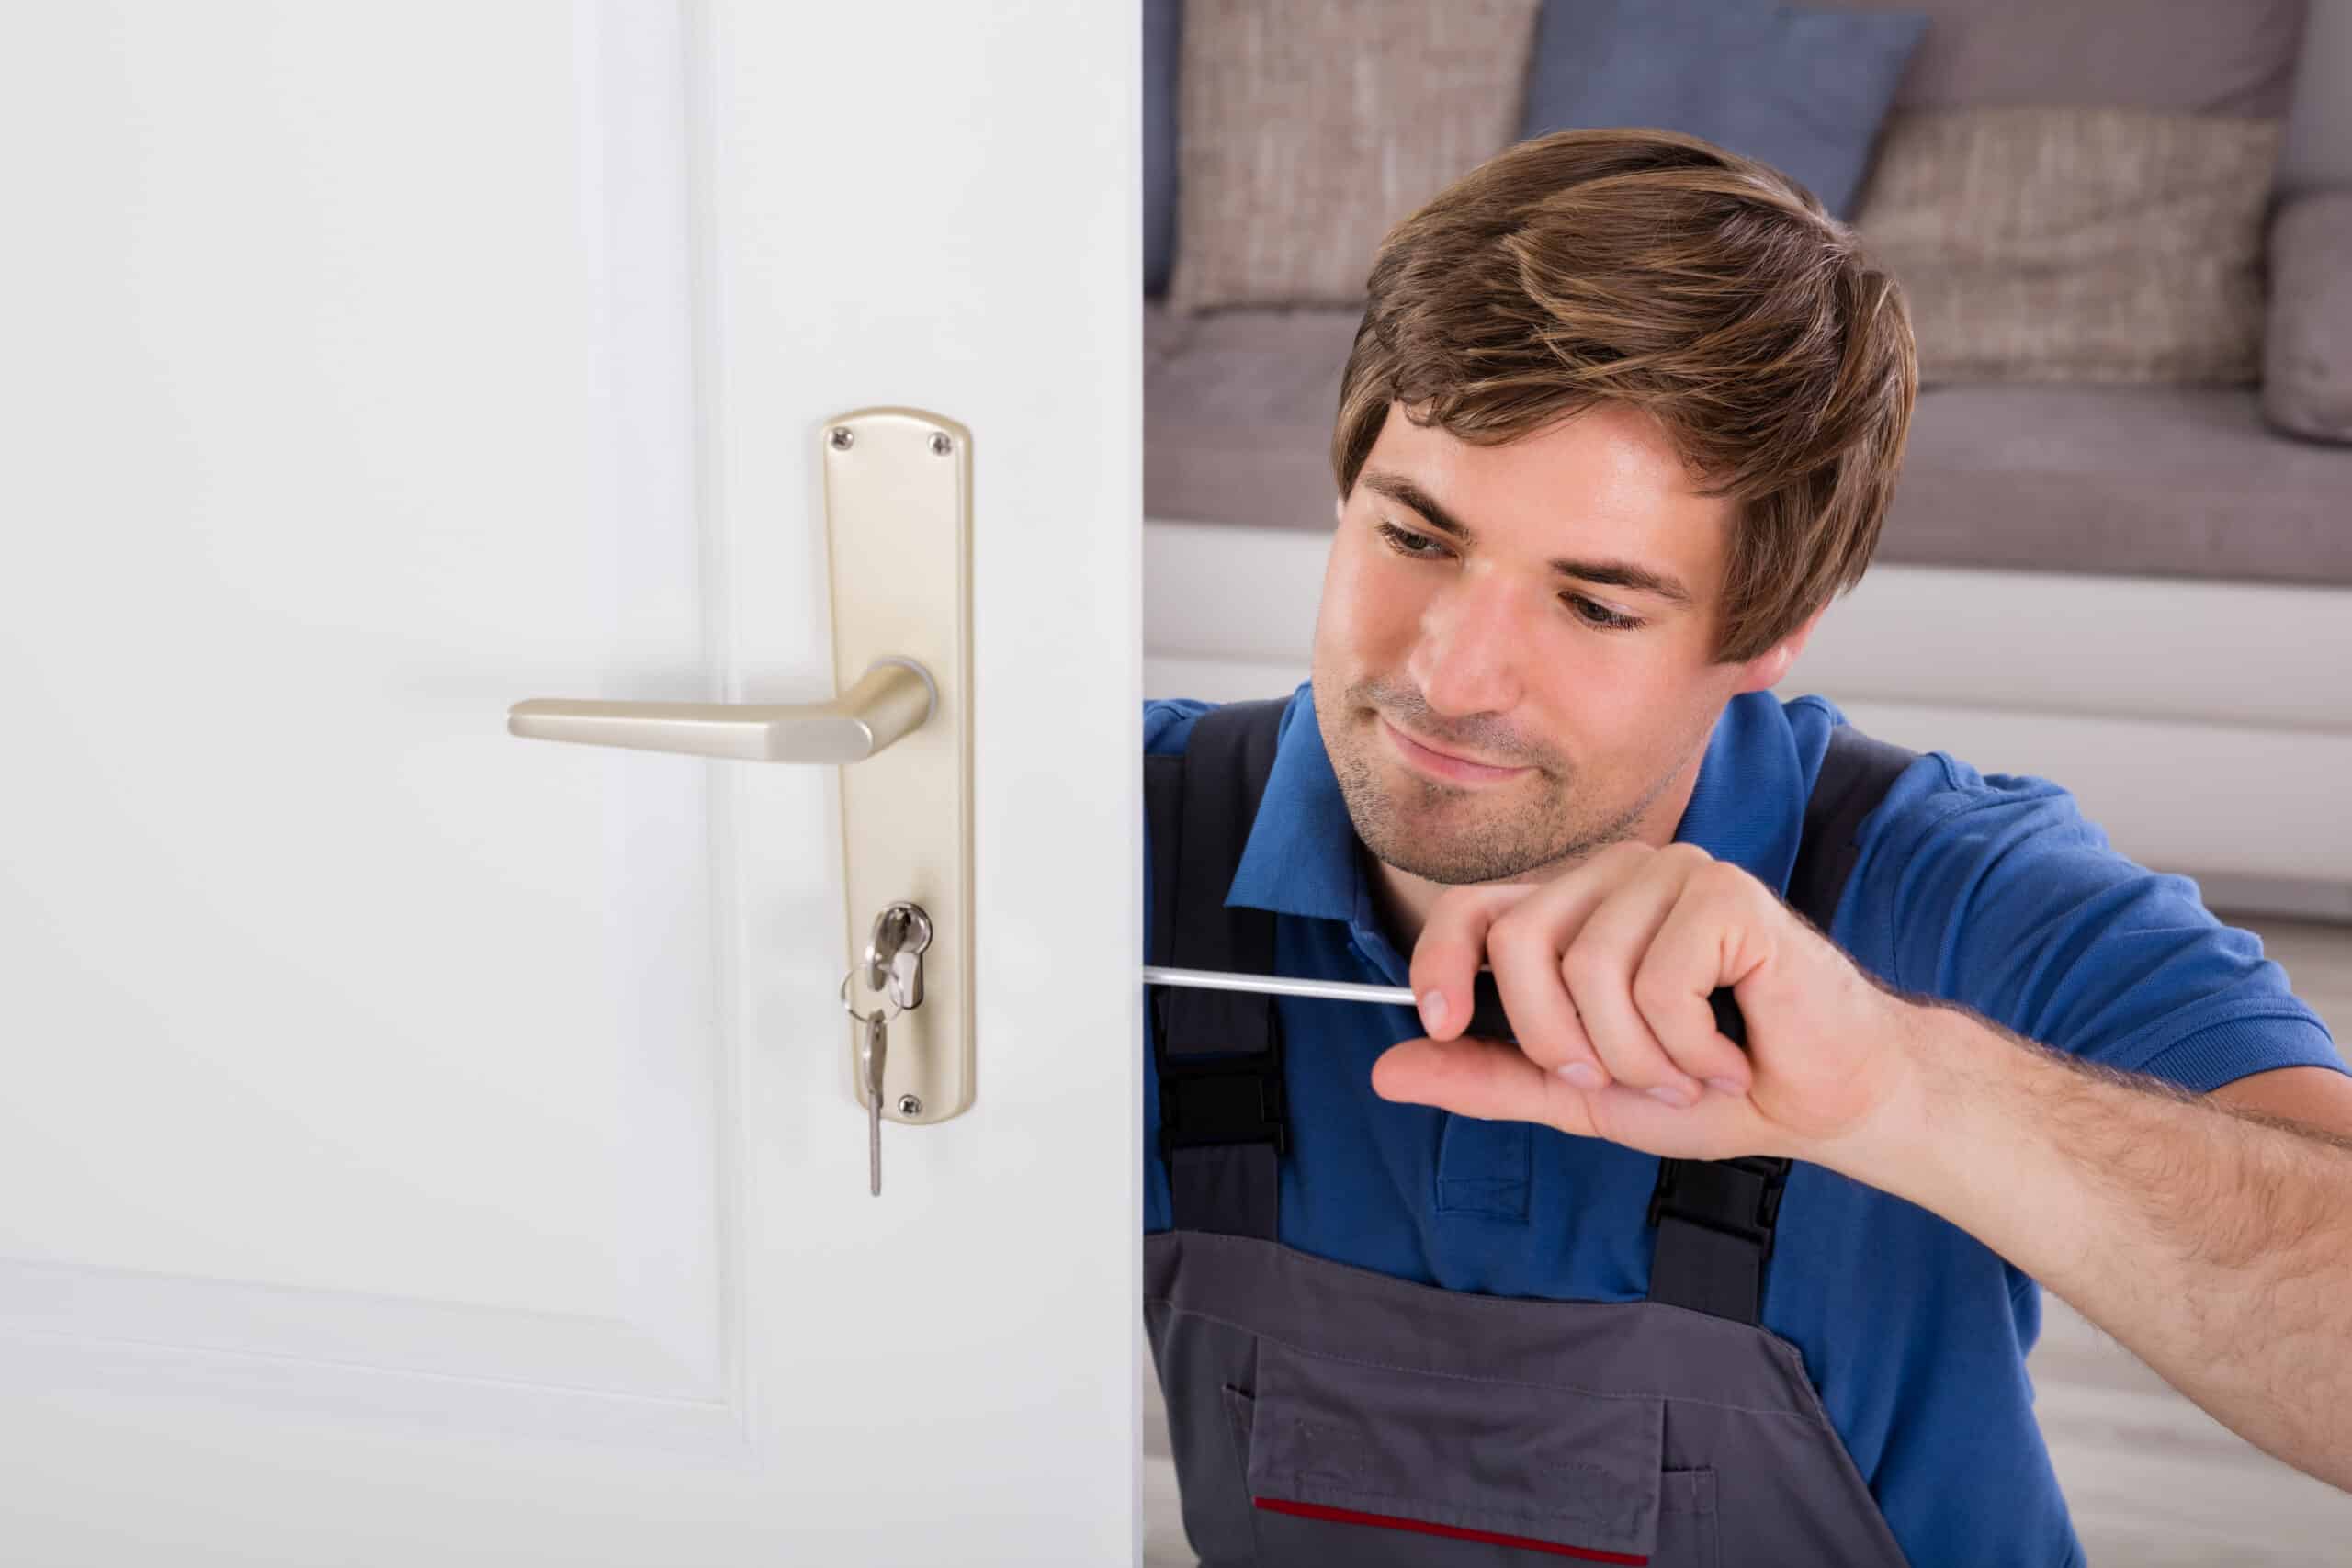 Locksmith Services Harrisburg: Ensuring Your Safety and Security